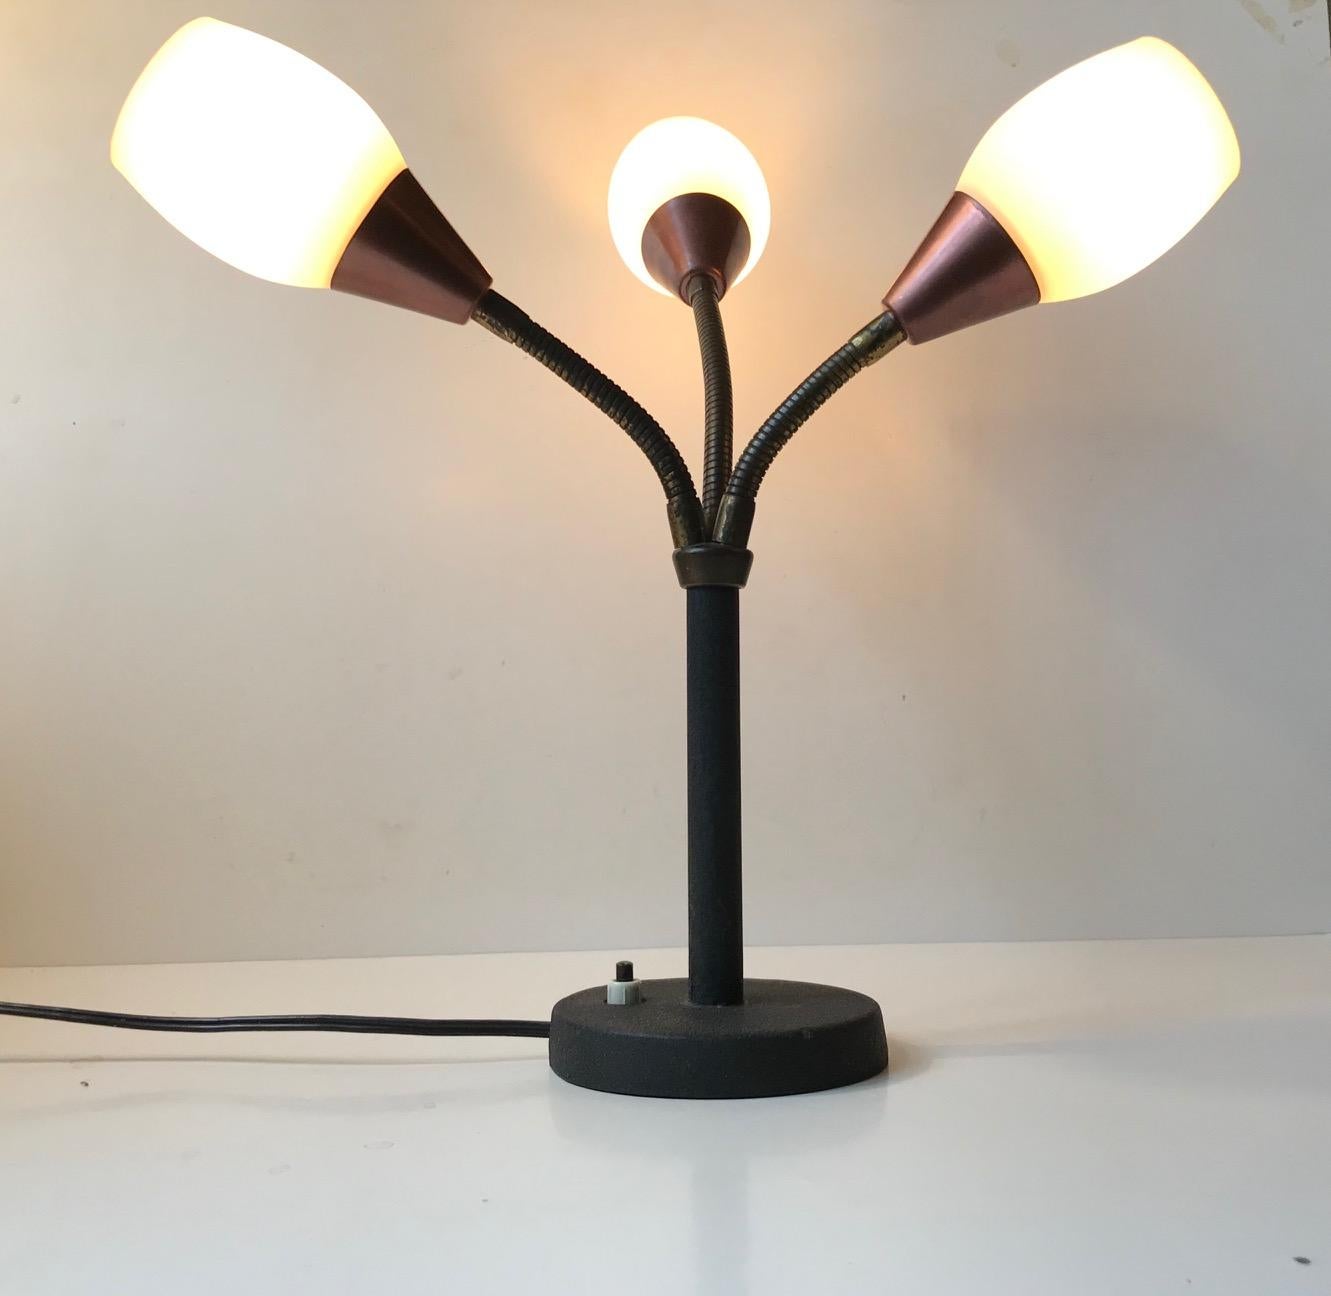 Three Shade Midcentury Table Lamp by E. S. Horn, 1950s For Sale 1